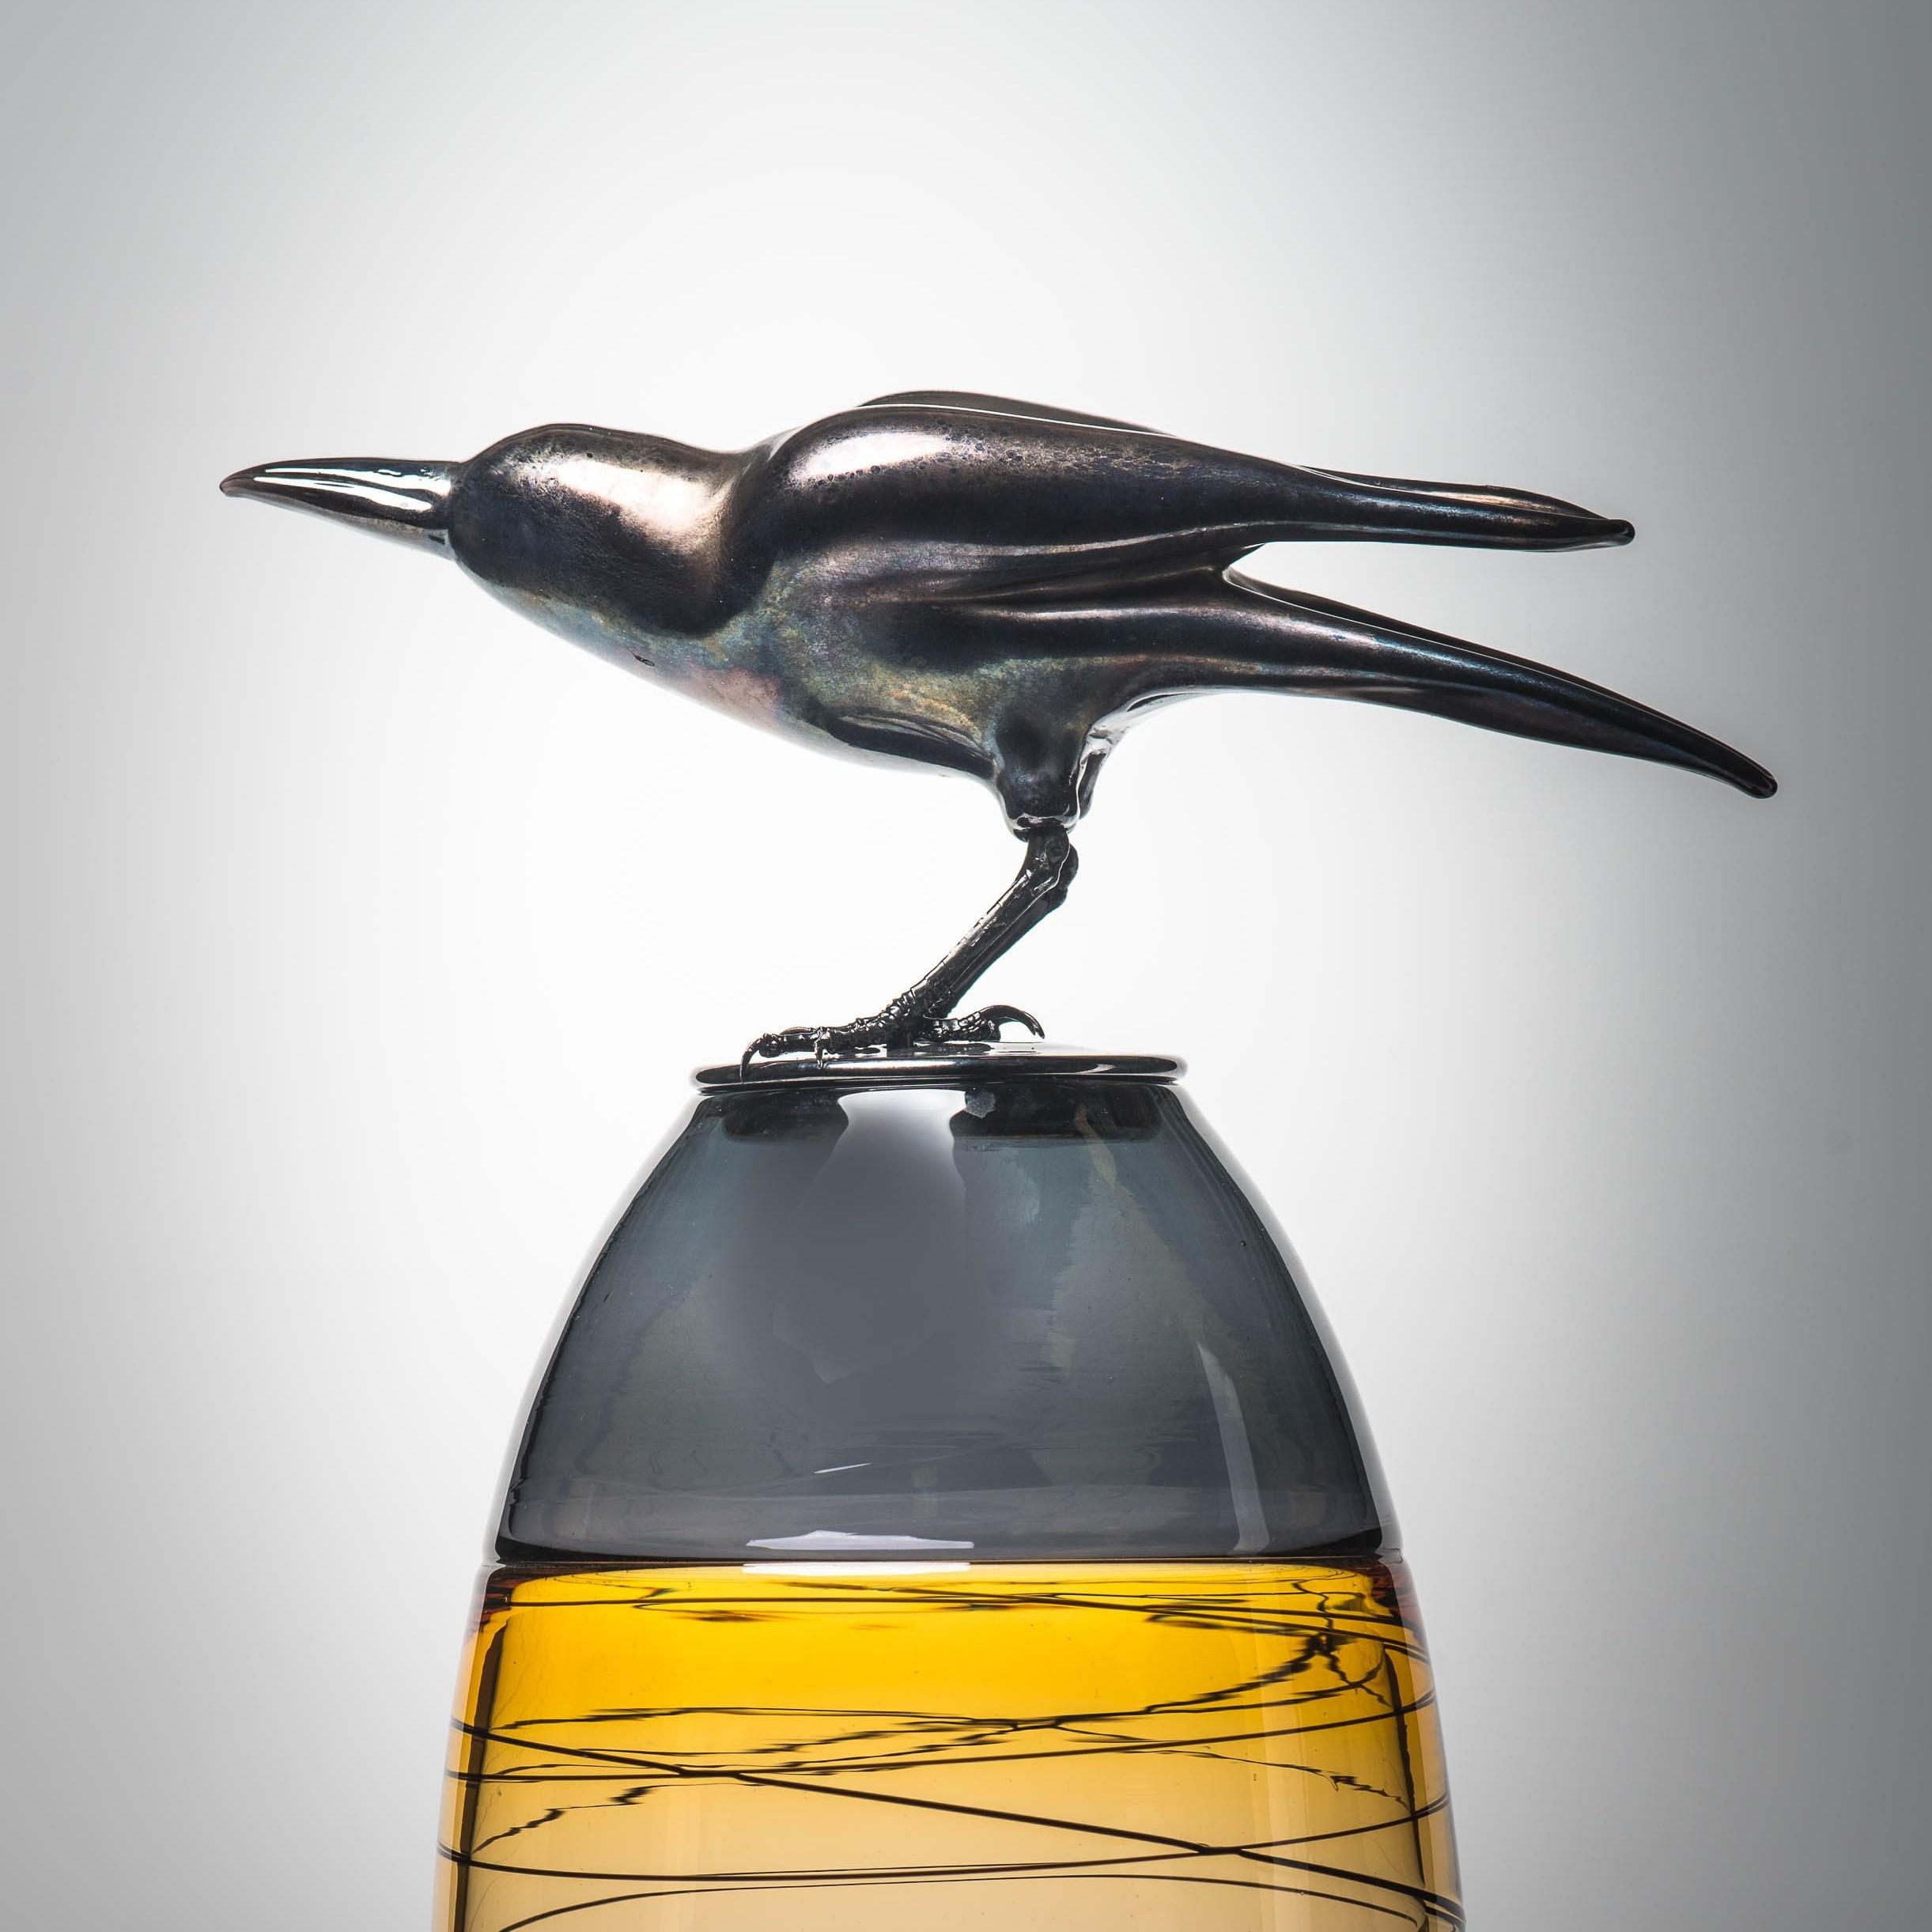 French Take off, a Unique Glass Sculptural Vase with Black Crow by Julie Johnson